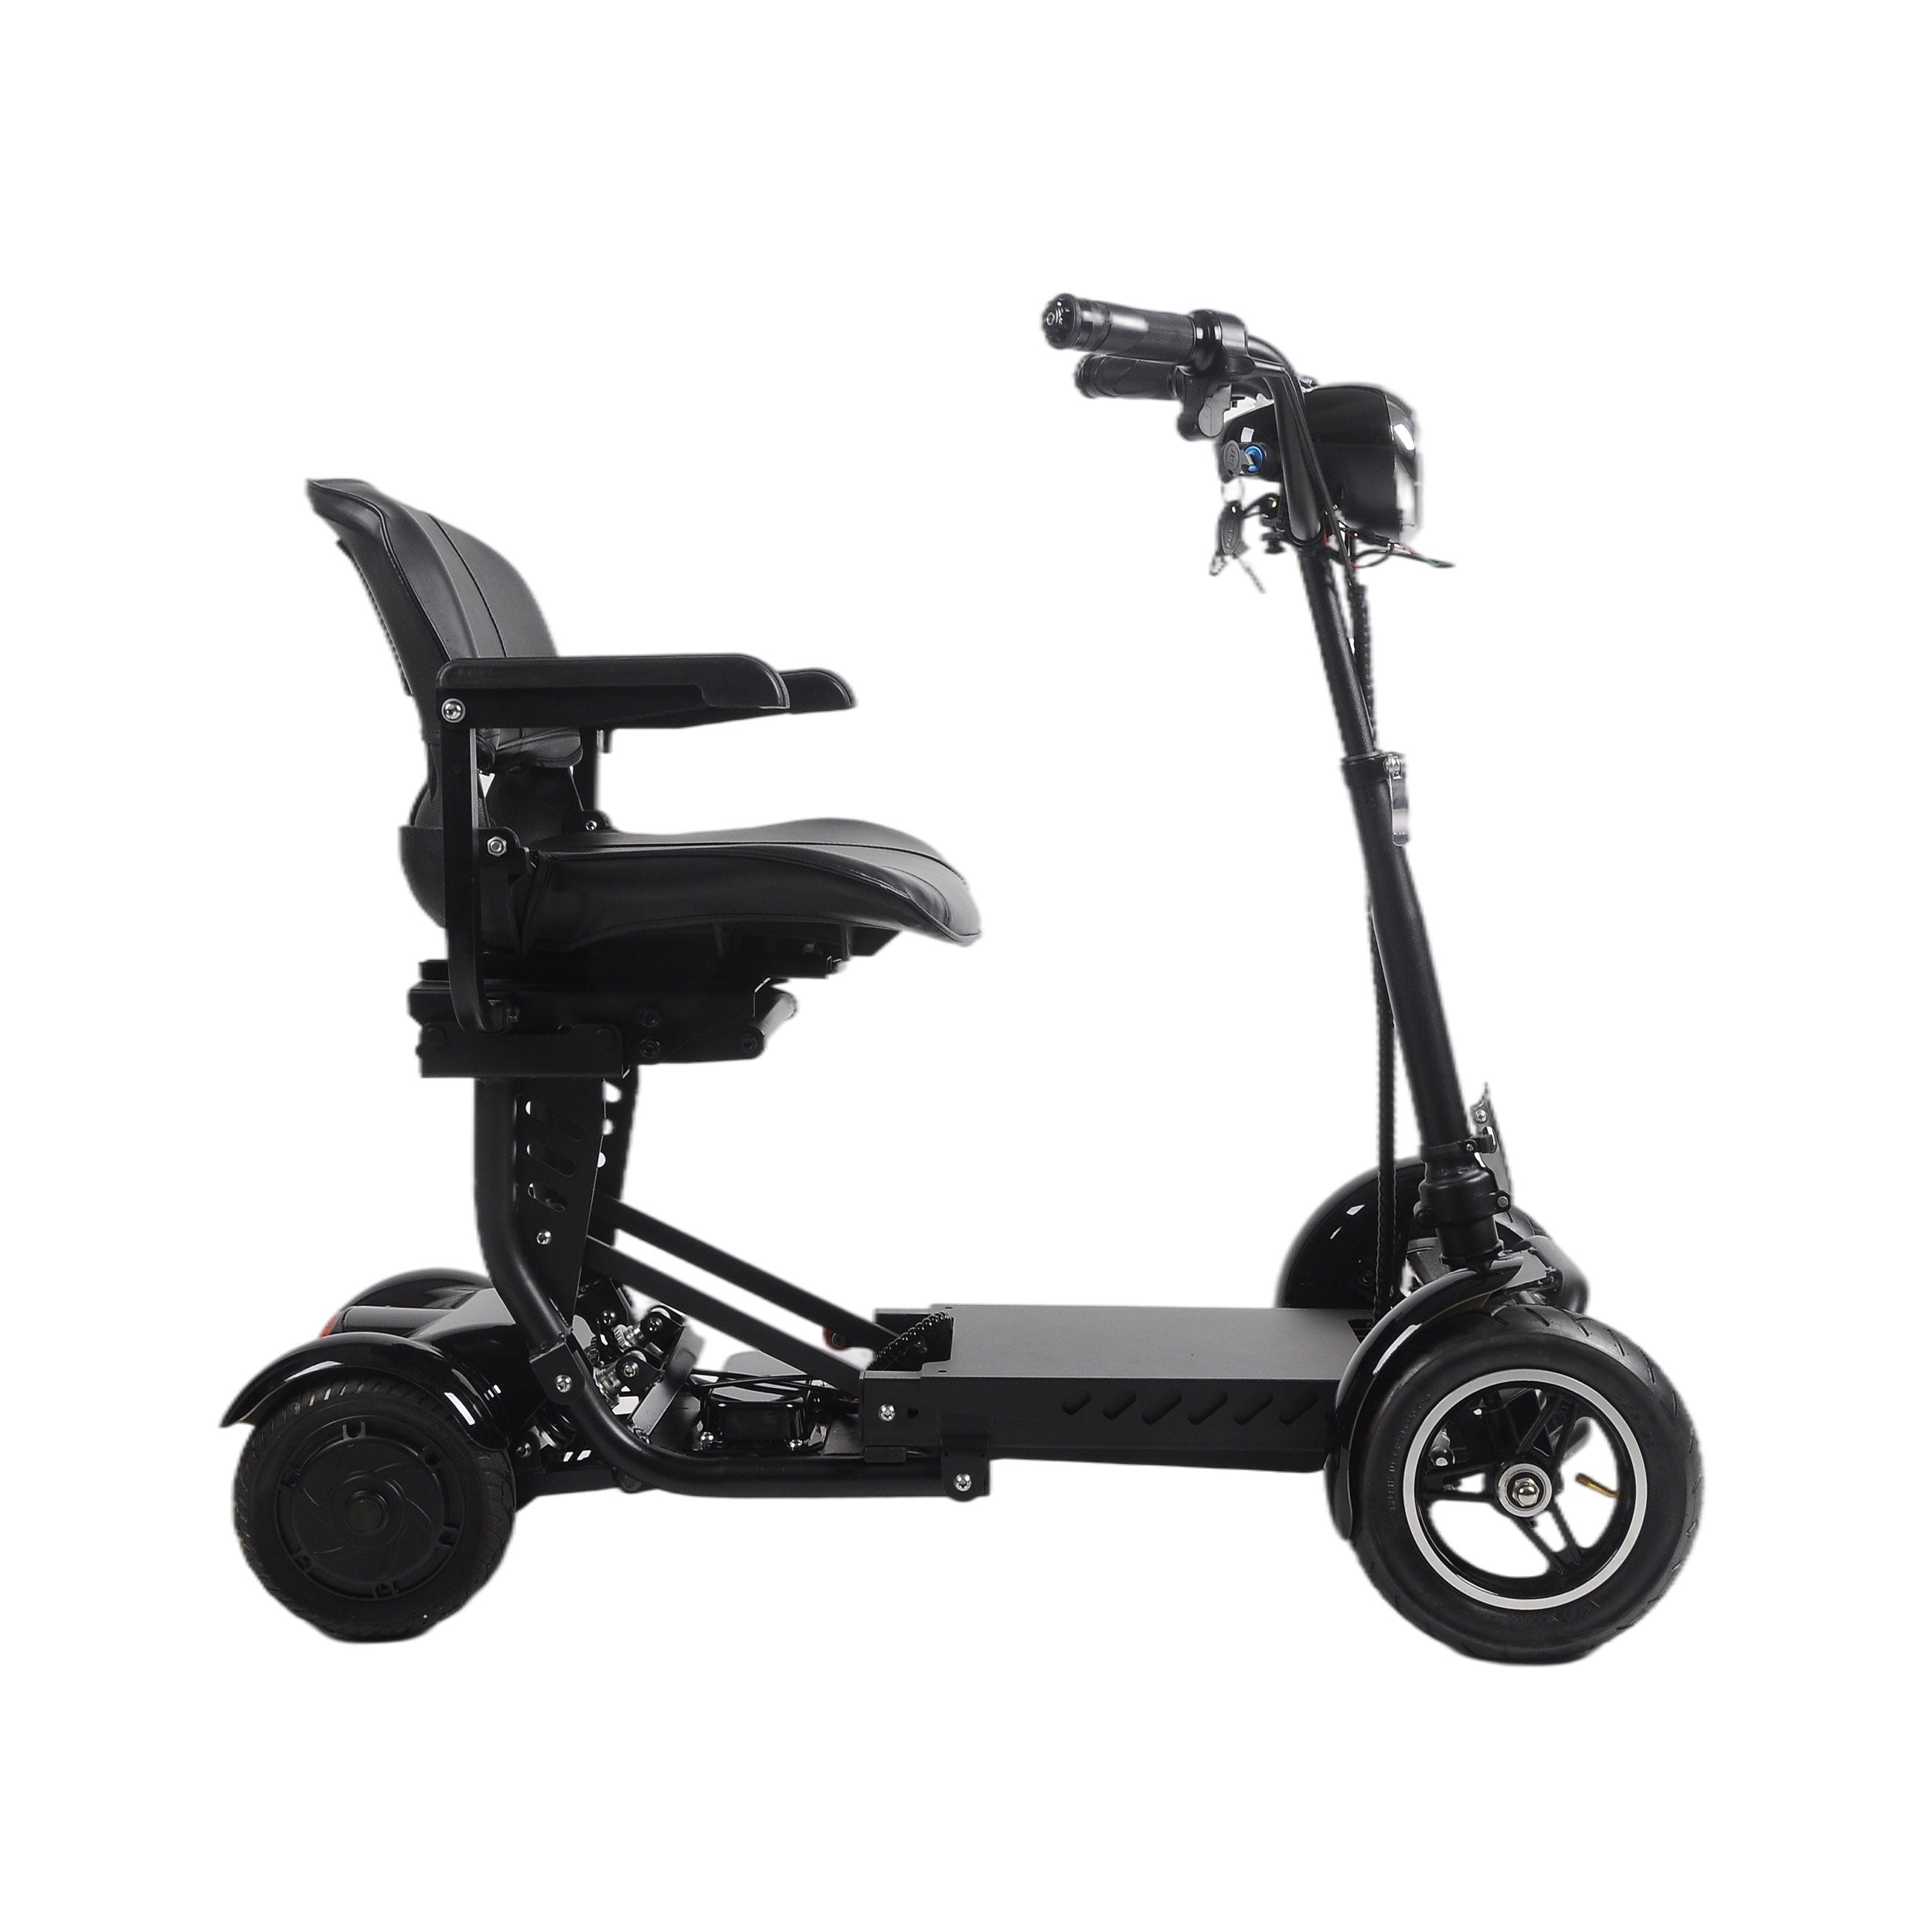 Rubicon FX mobility scooter foldable